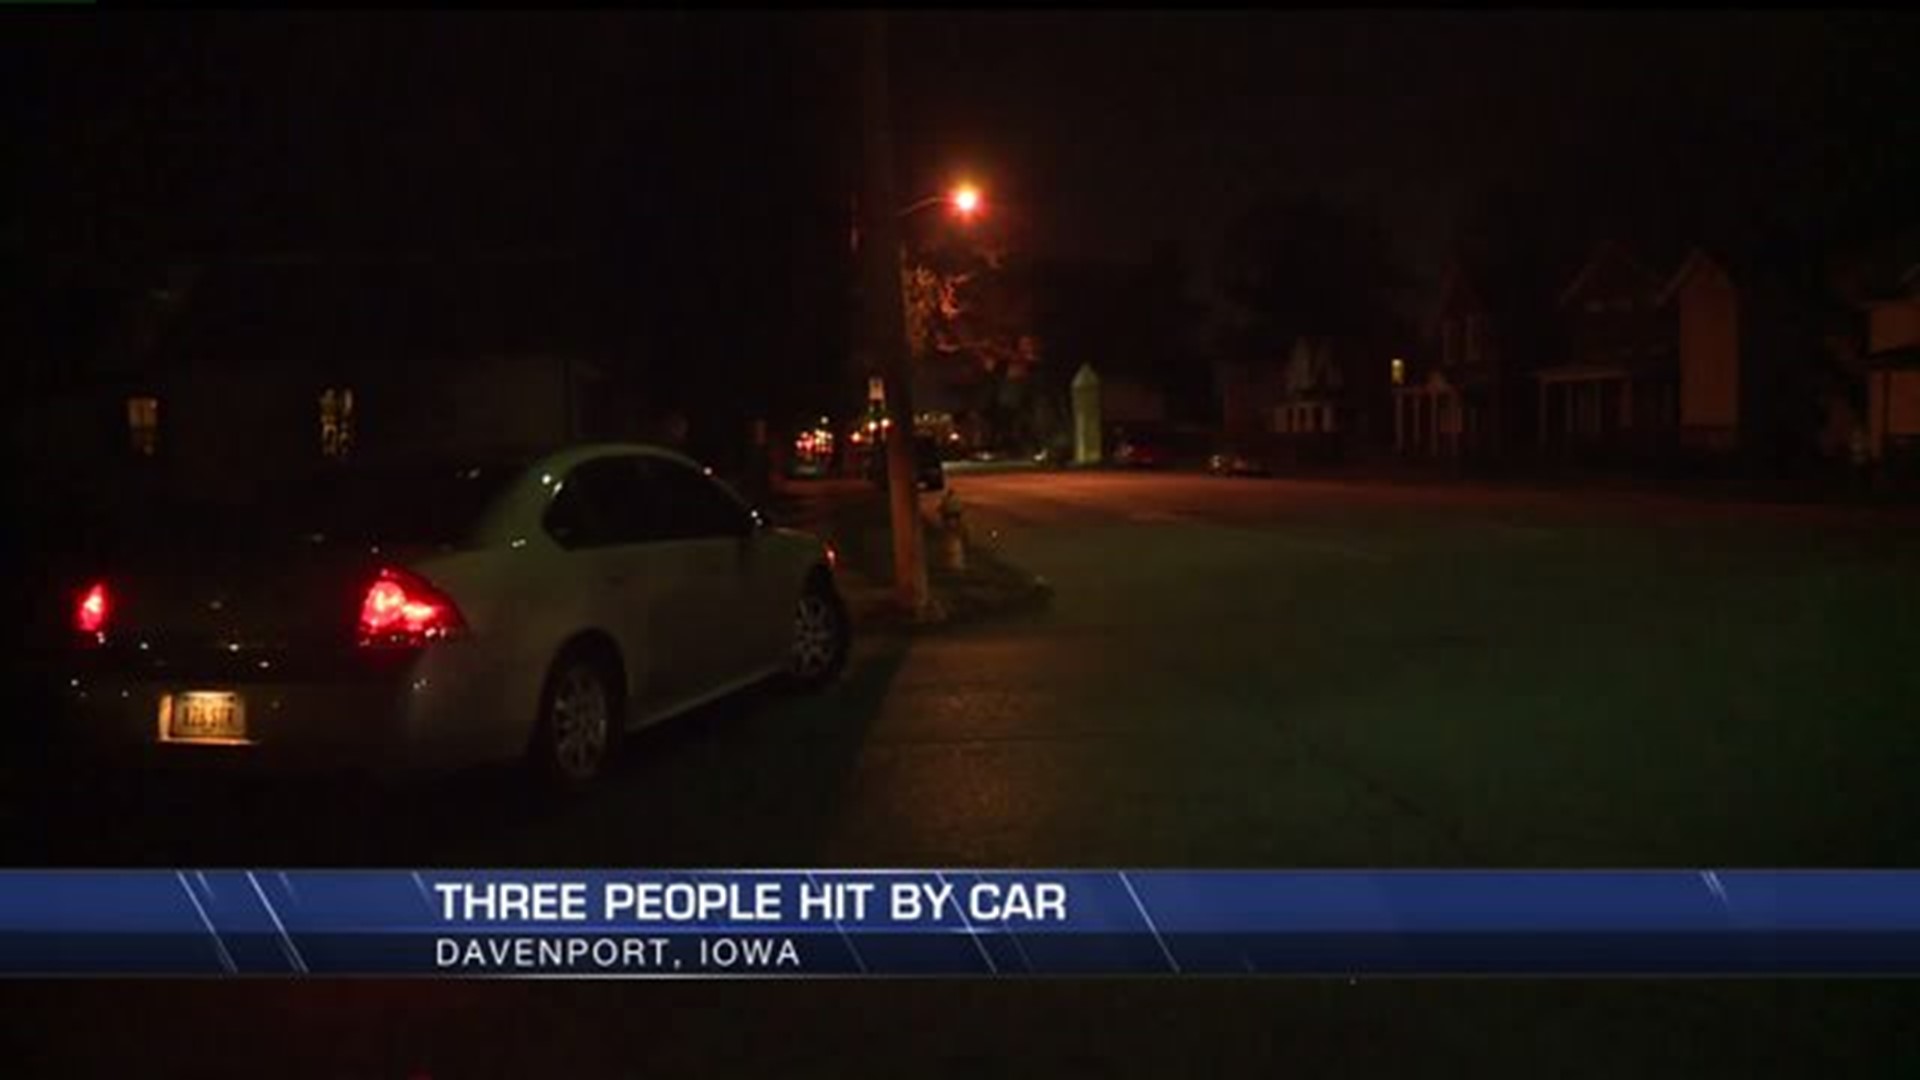 Three people hit by car in Davenport